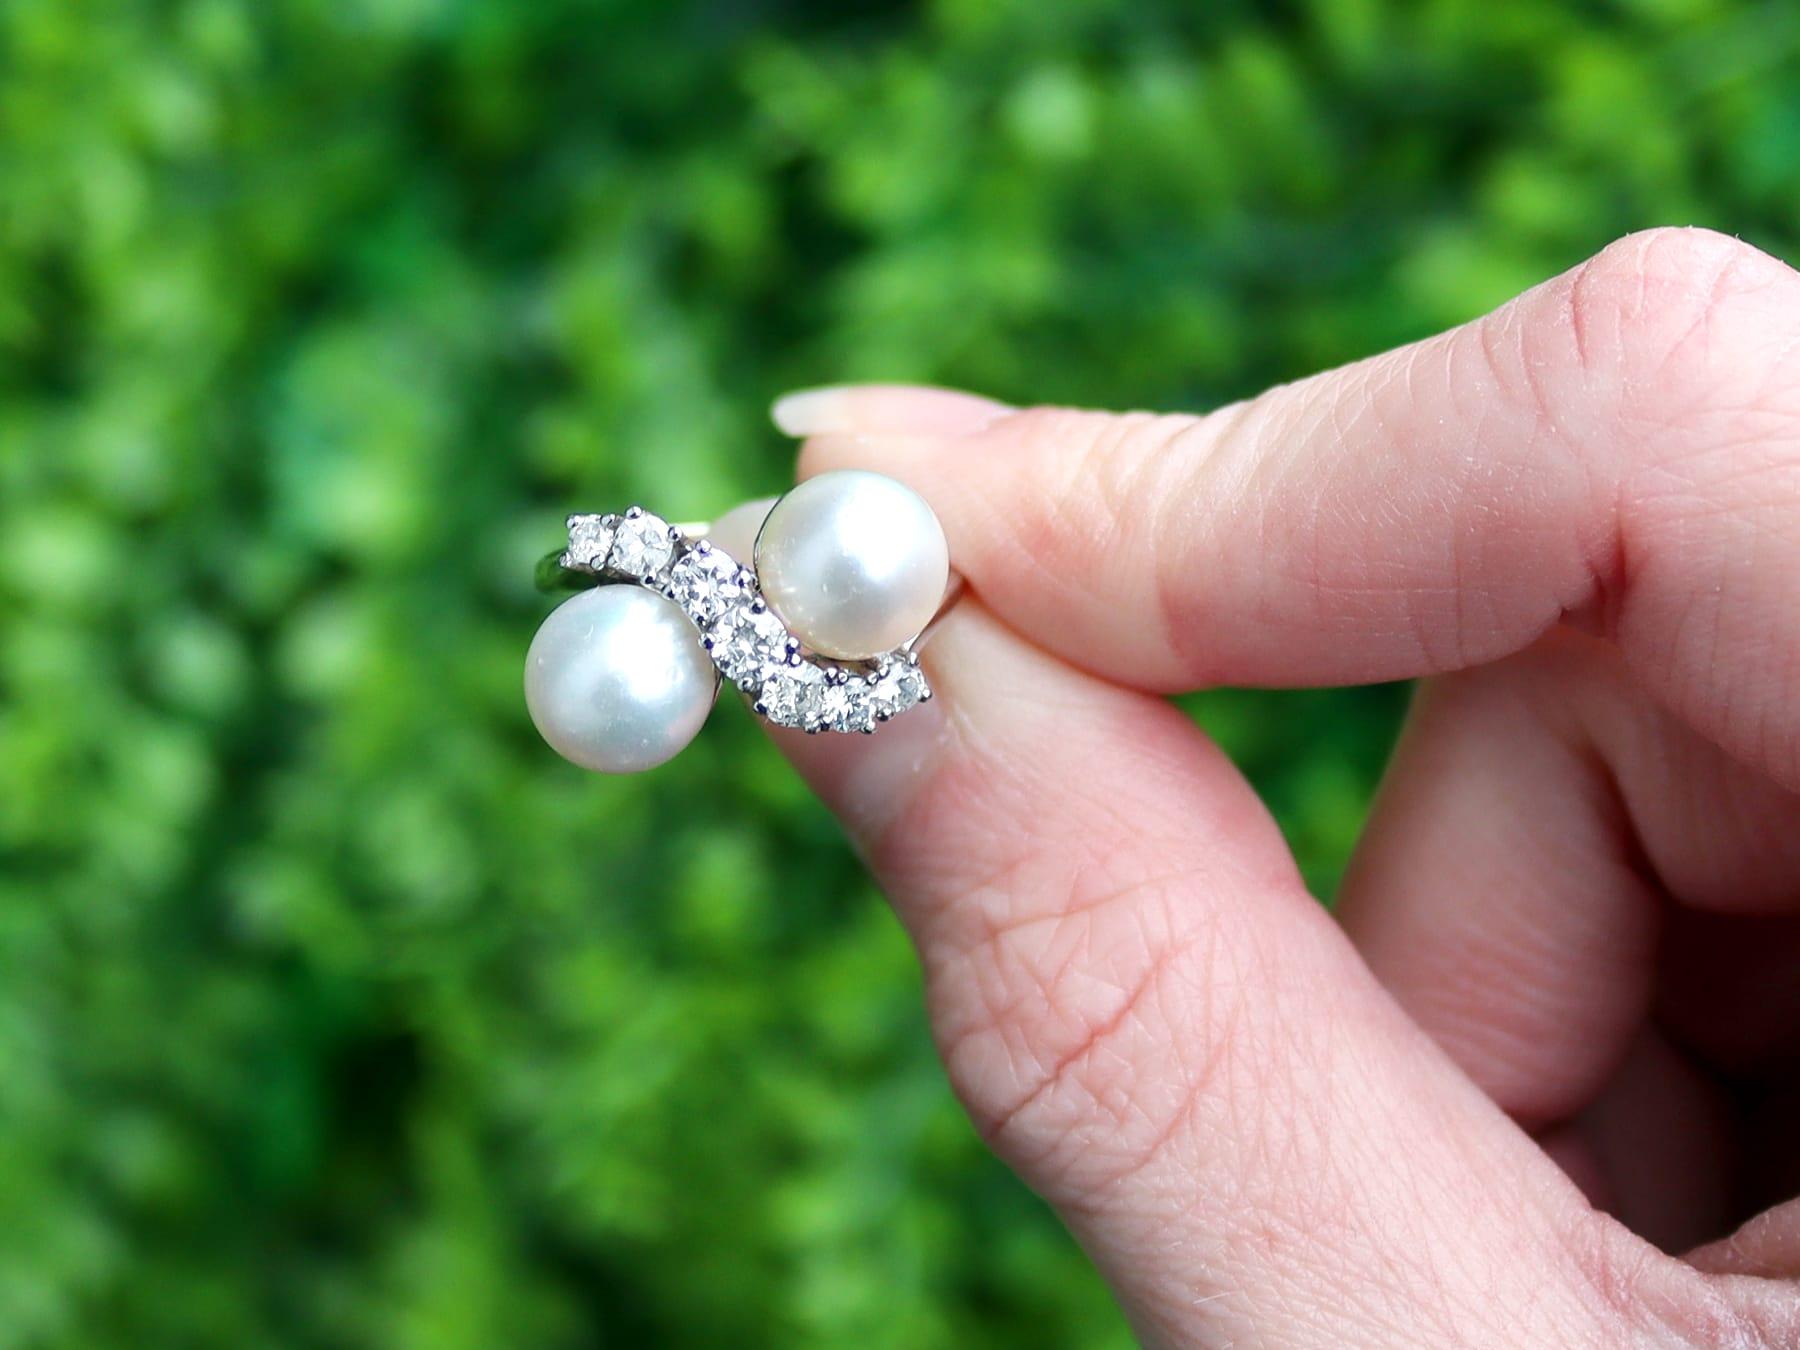 An impressive vintage 1970s cultured pearl and 1.04 Ct diamond, 14k white gold twist ring; part of our diverse pearl jewelry and estate jewelry collections.

This fine and impressive vintage cultured pearl and diamond ring has been crafted in 14k